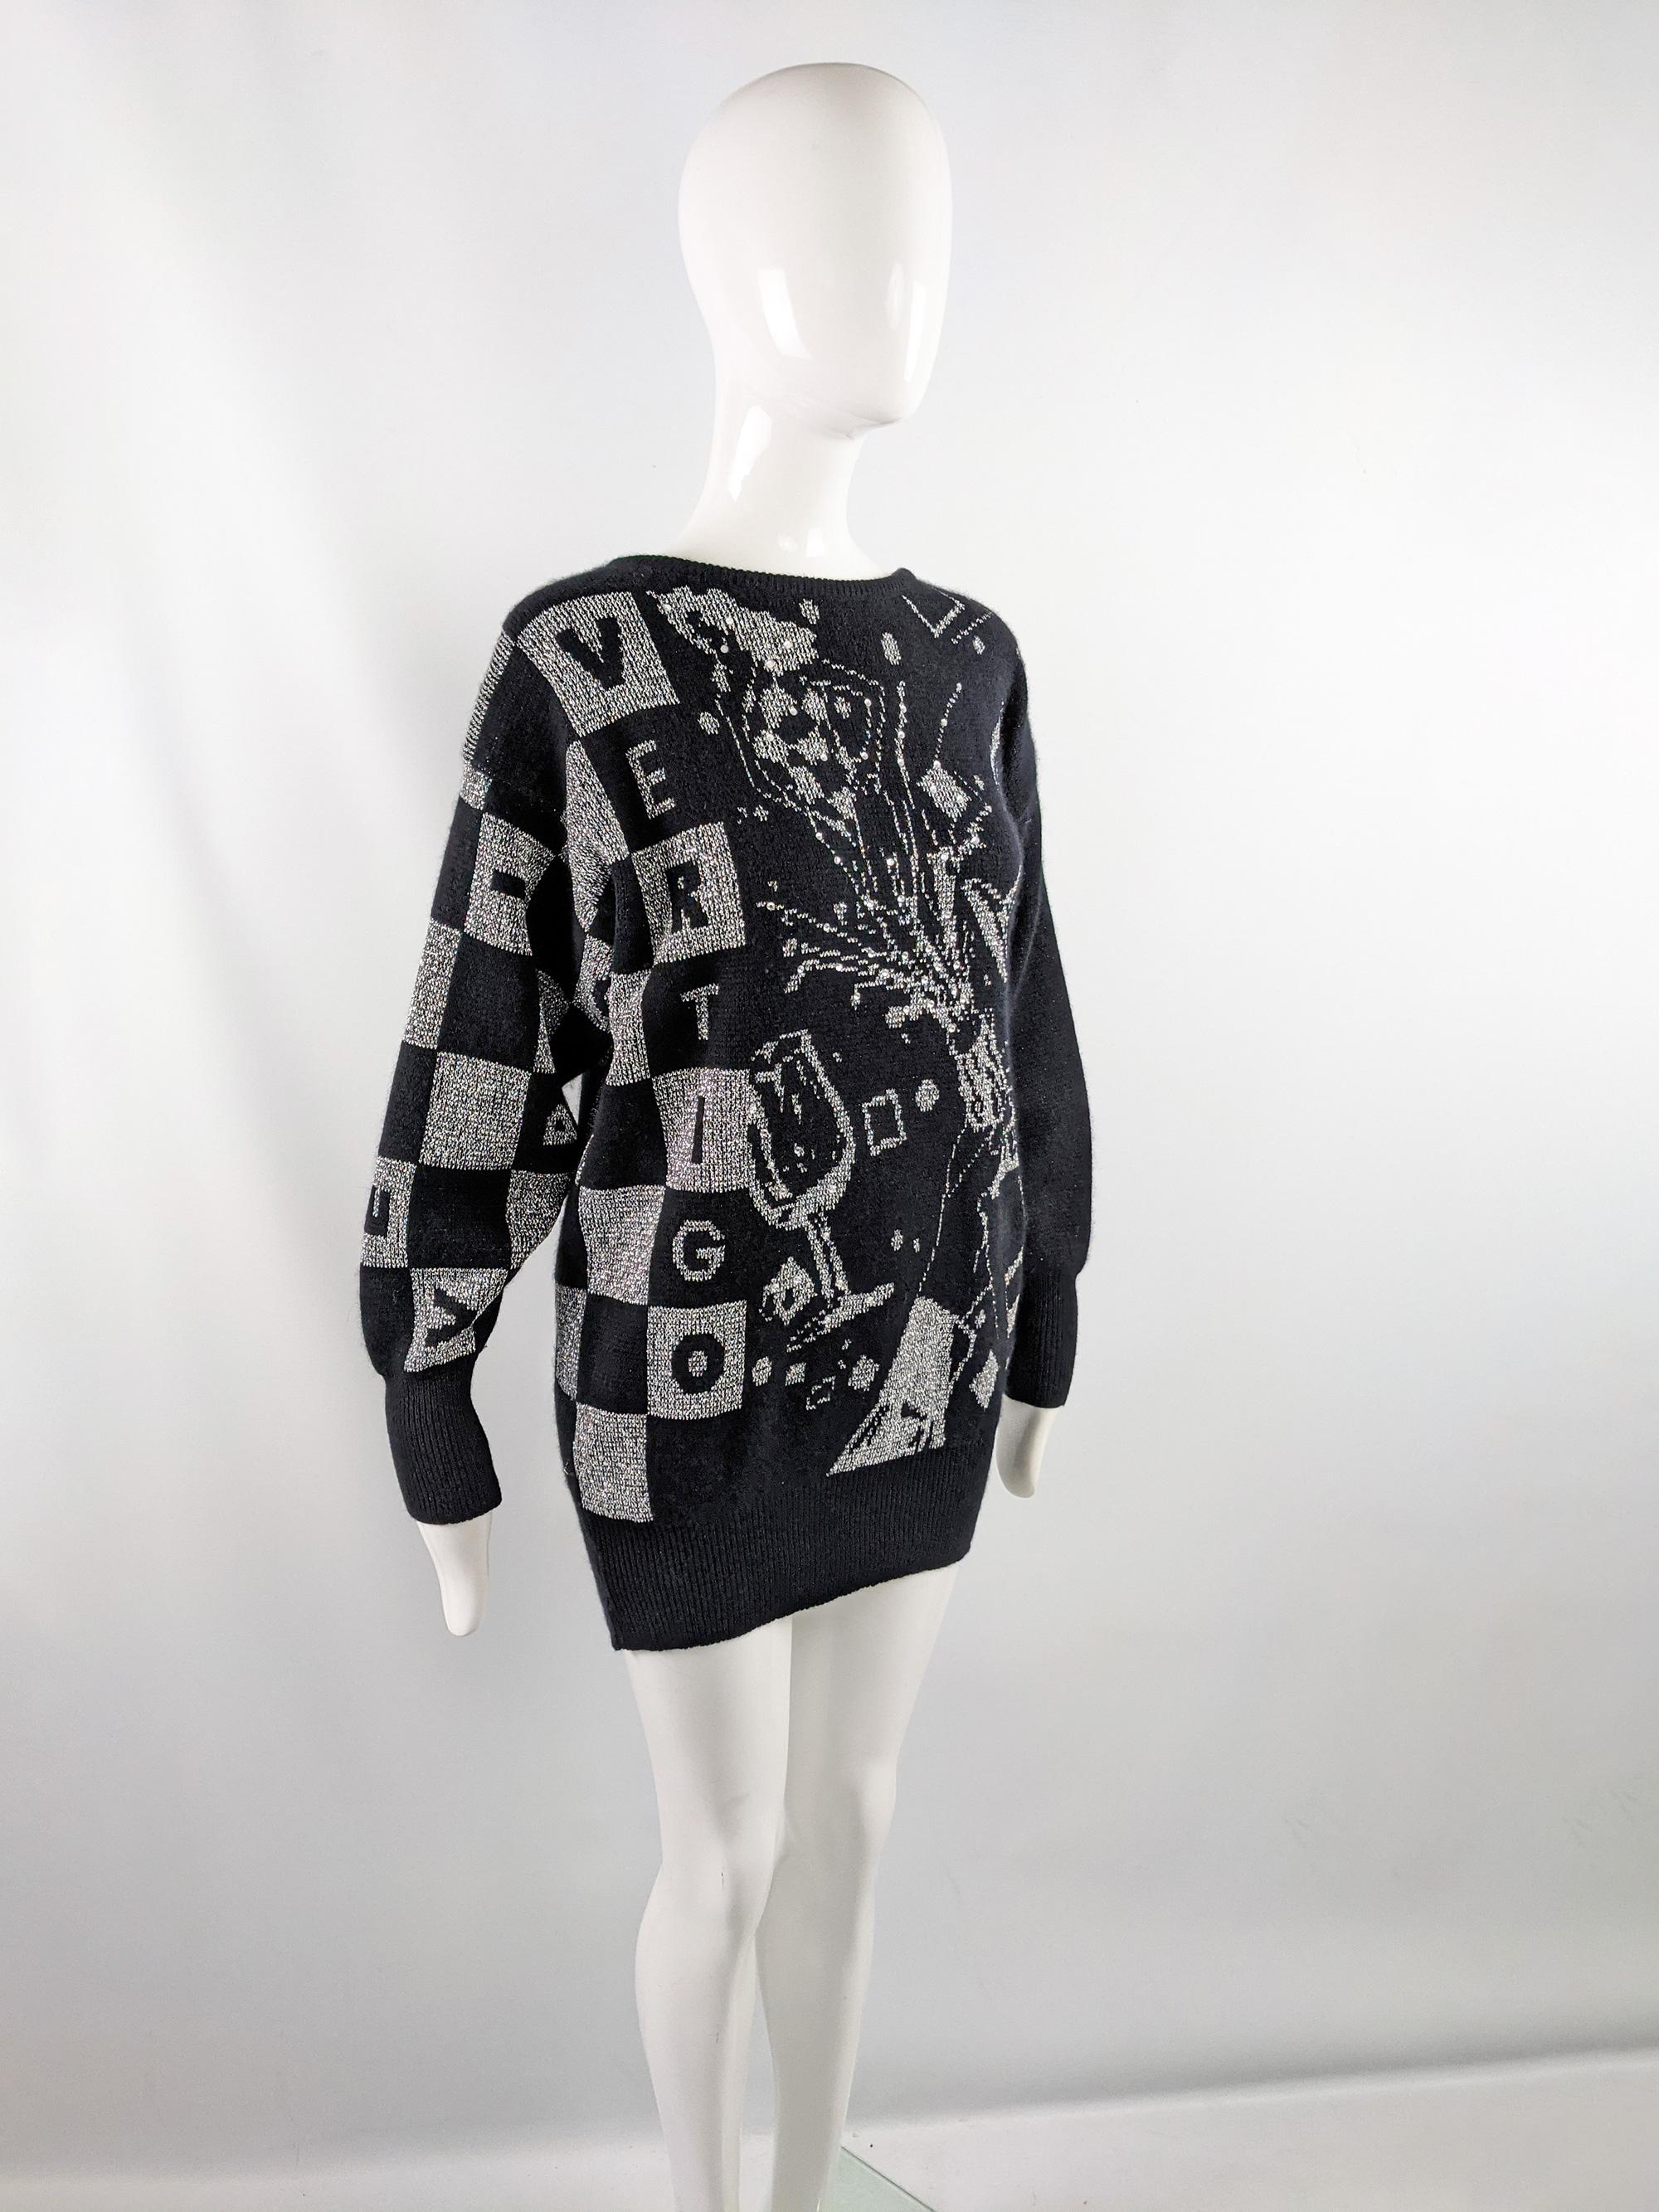 Mondi Vintage 80s Black & Silver Lurex Champagne Intarsia Knit Sweater, 1980s In Good Condition For Sale In Doncaster, South Yorkshire